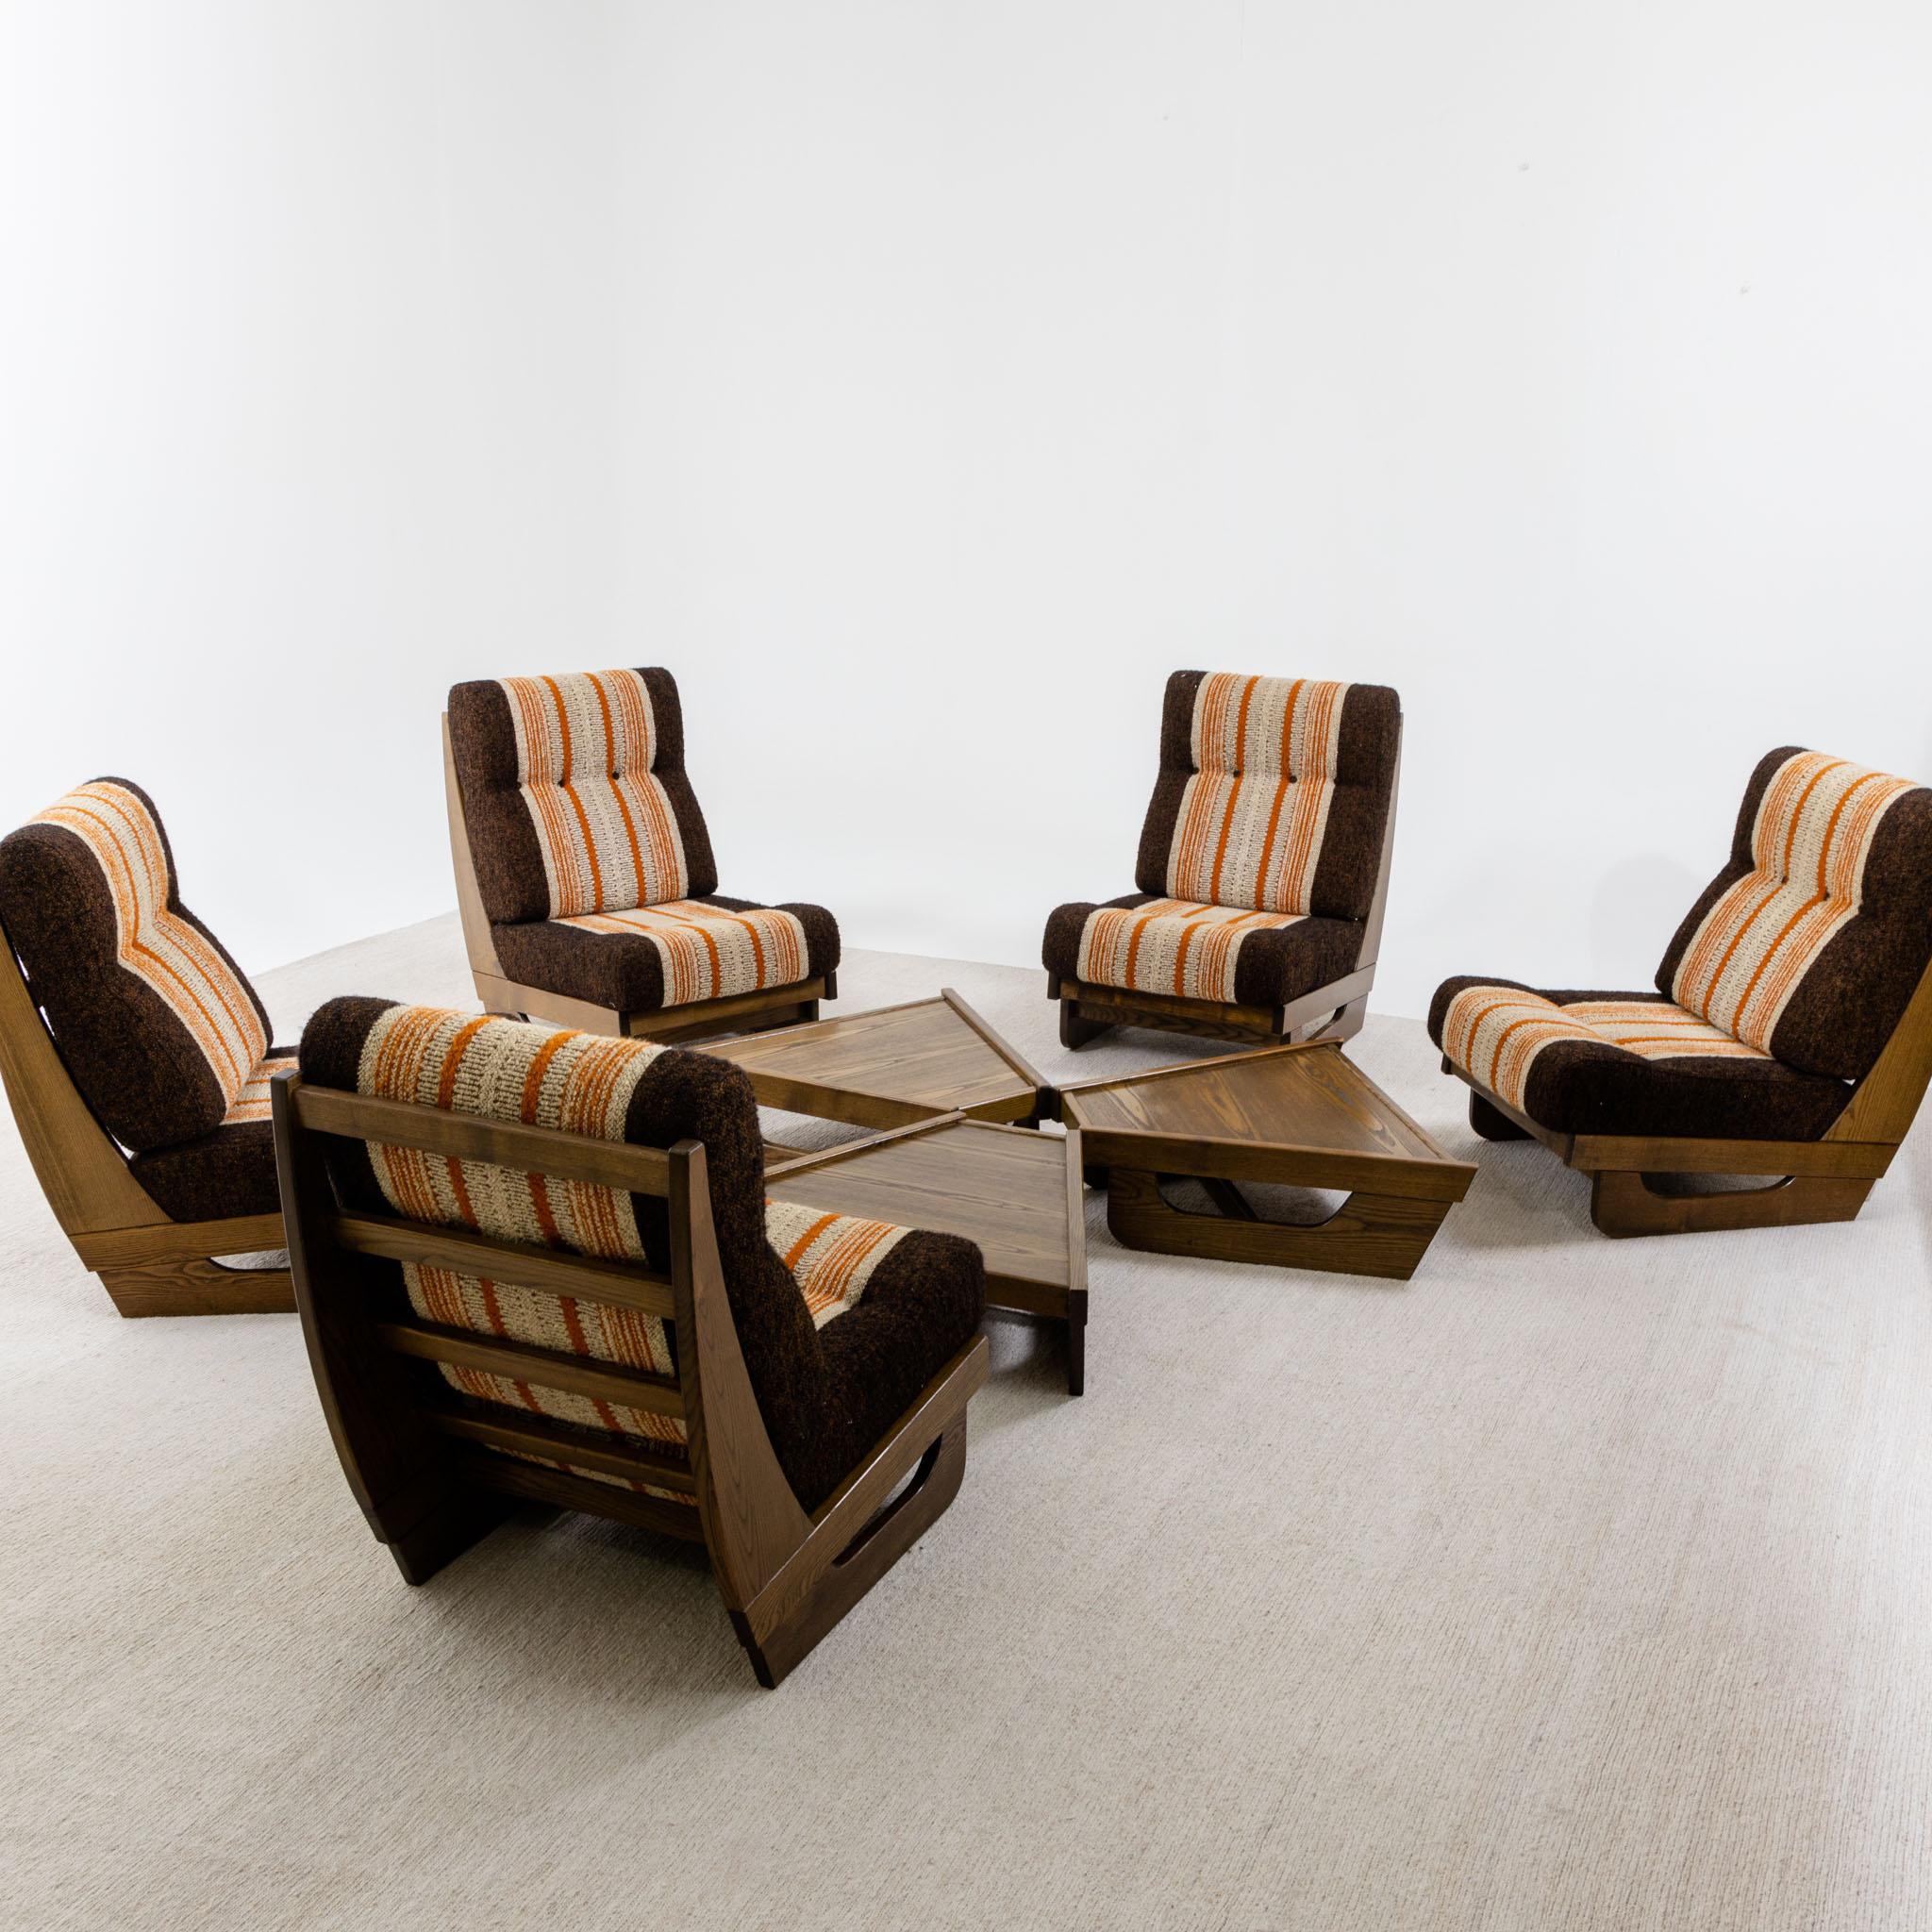 Italian Modular Seating Group with five Lounge Chairs, Italy 1950s For Sale